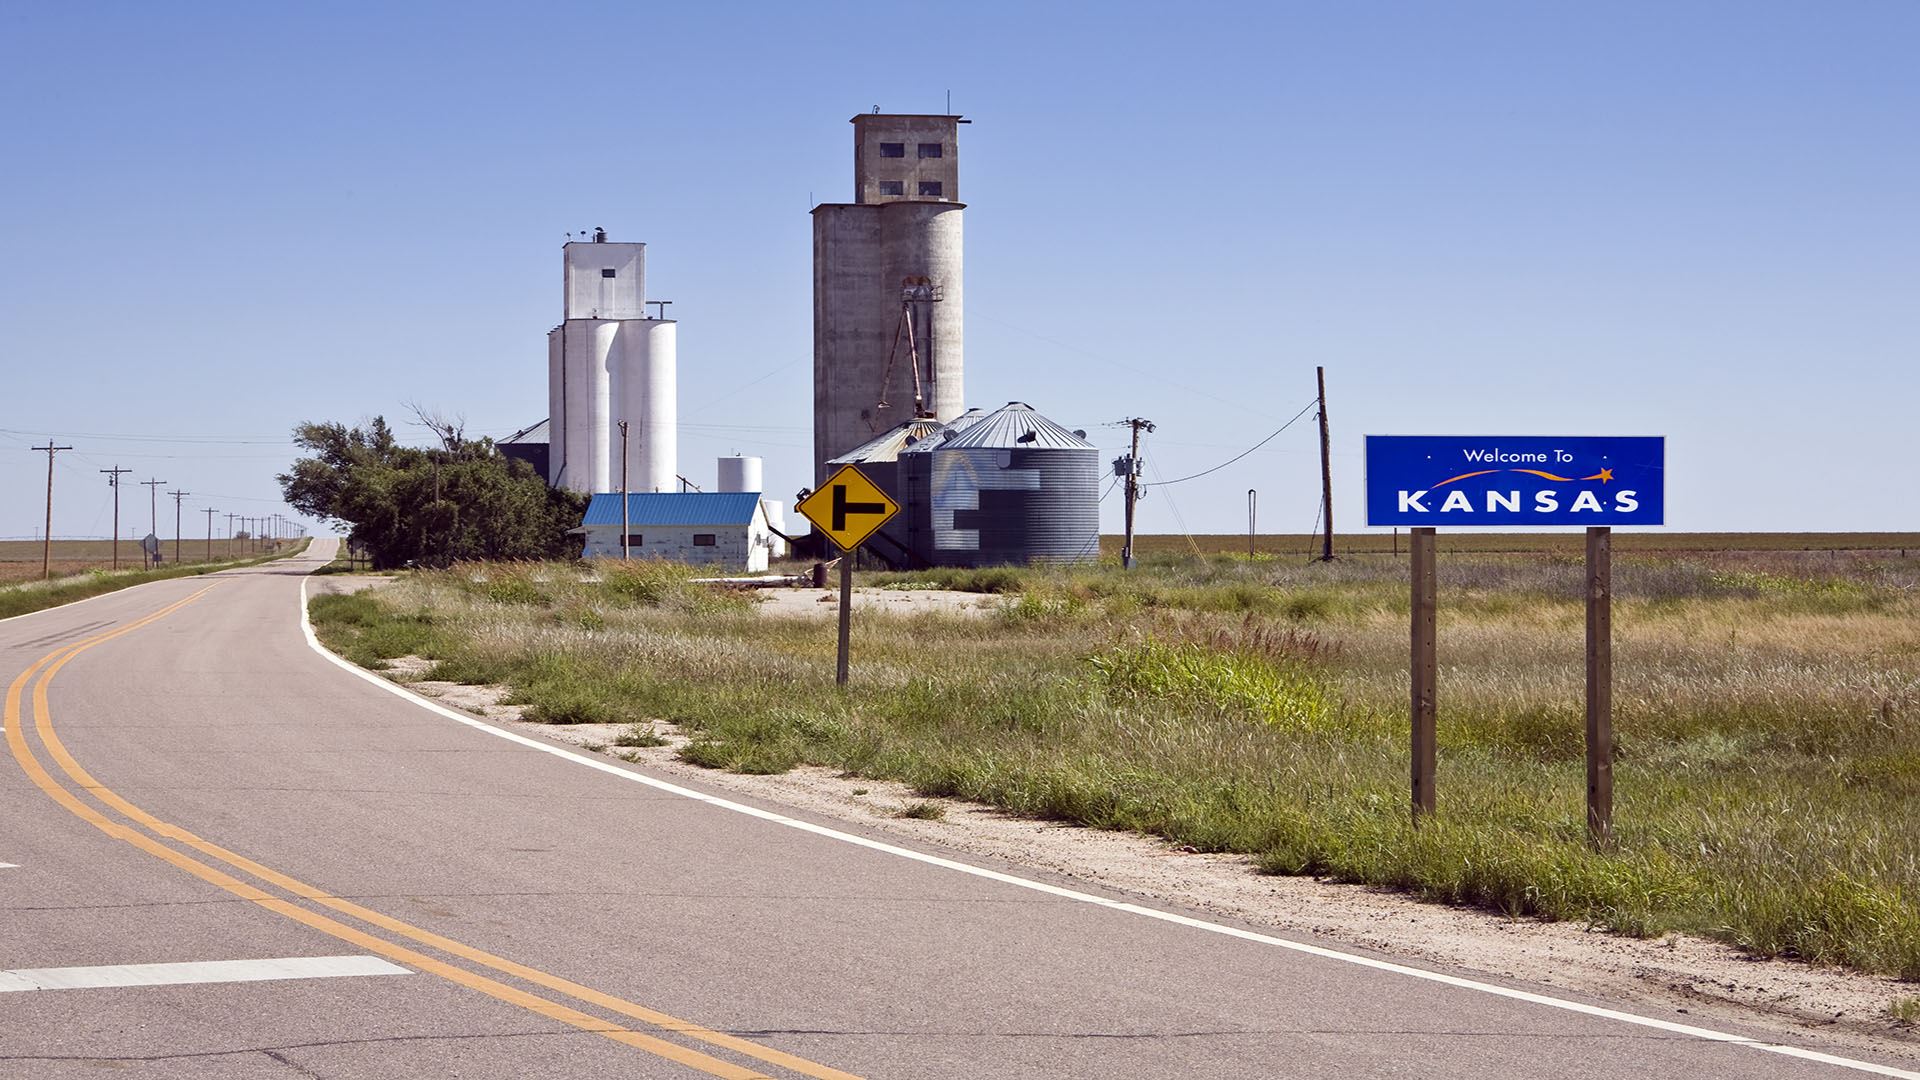 country highway entering a small Kansas town